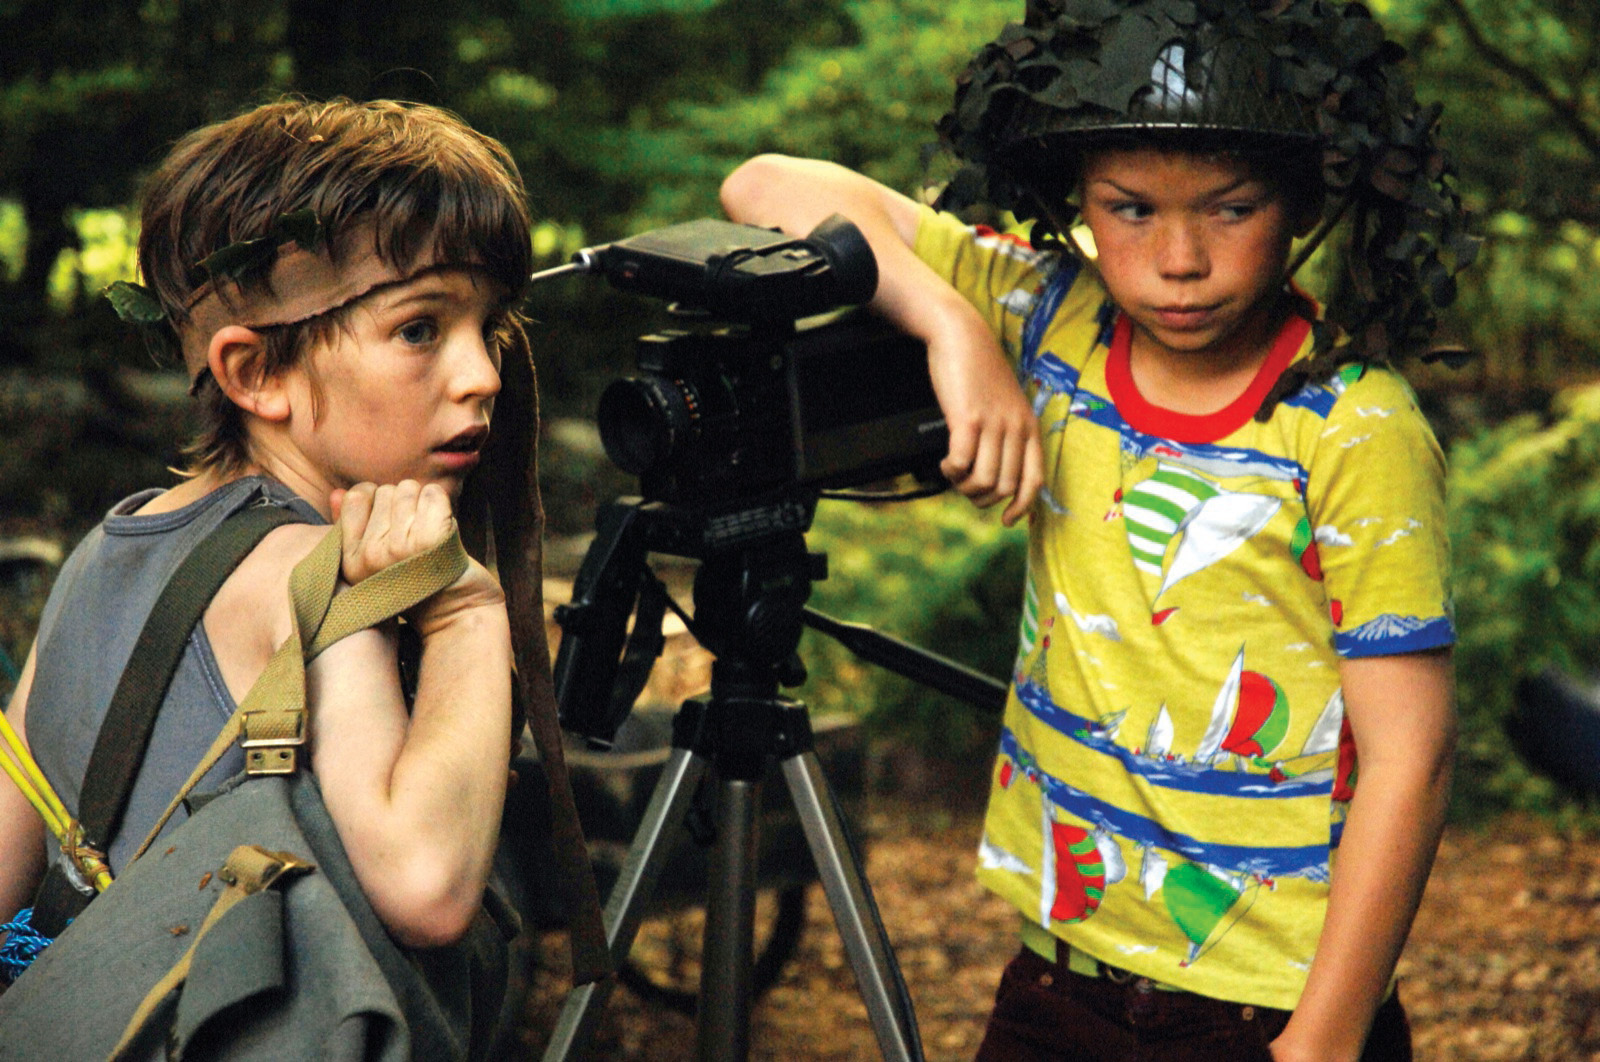 Son of Rambow 2007